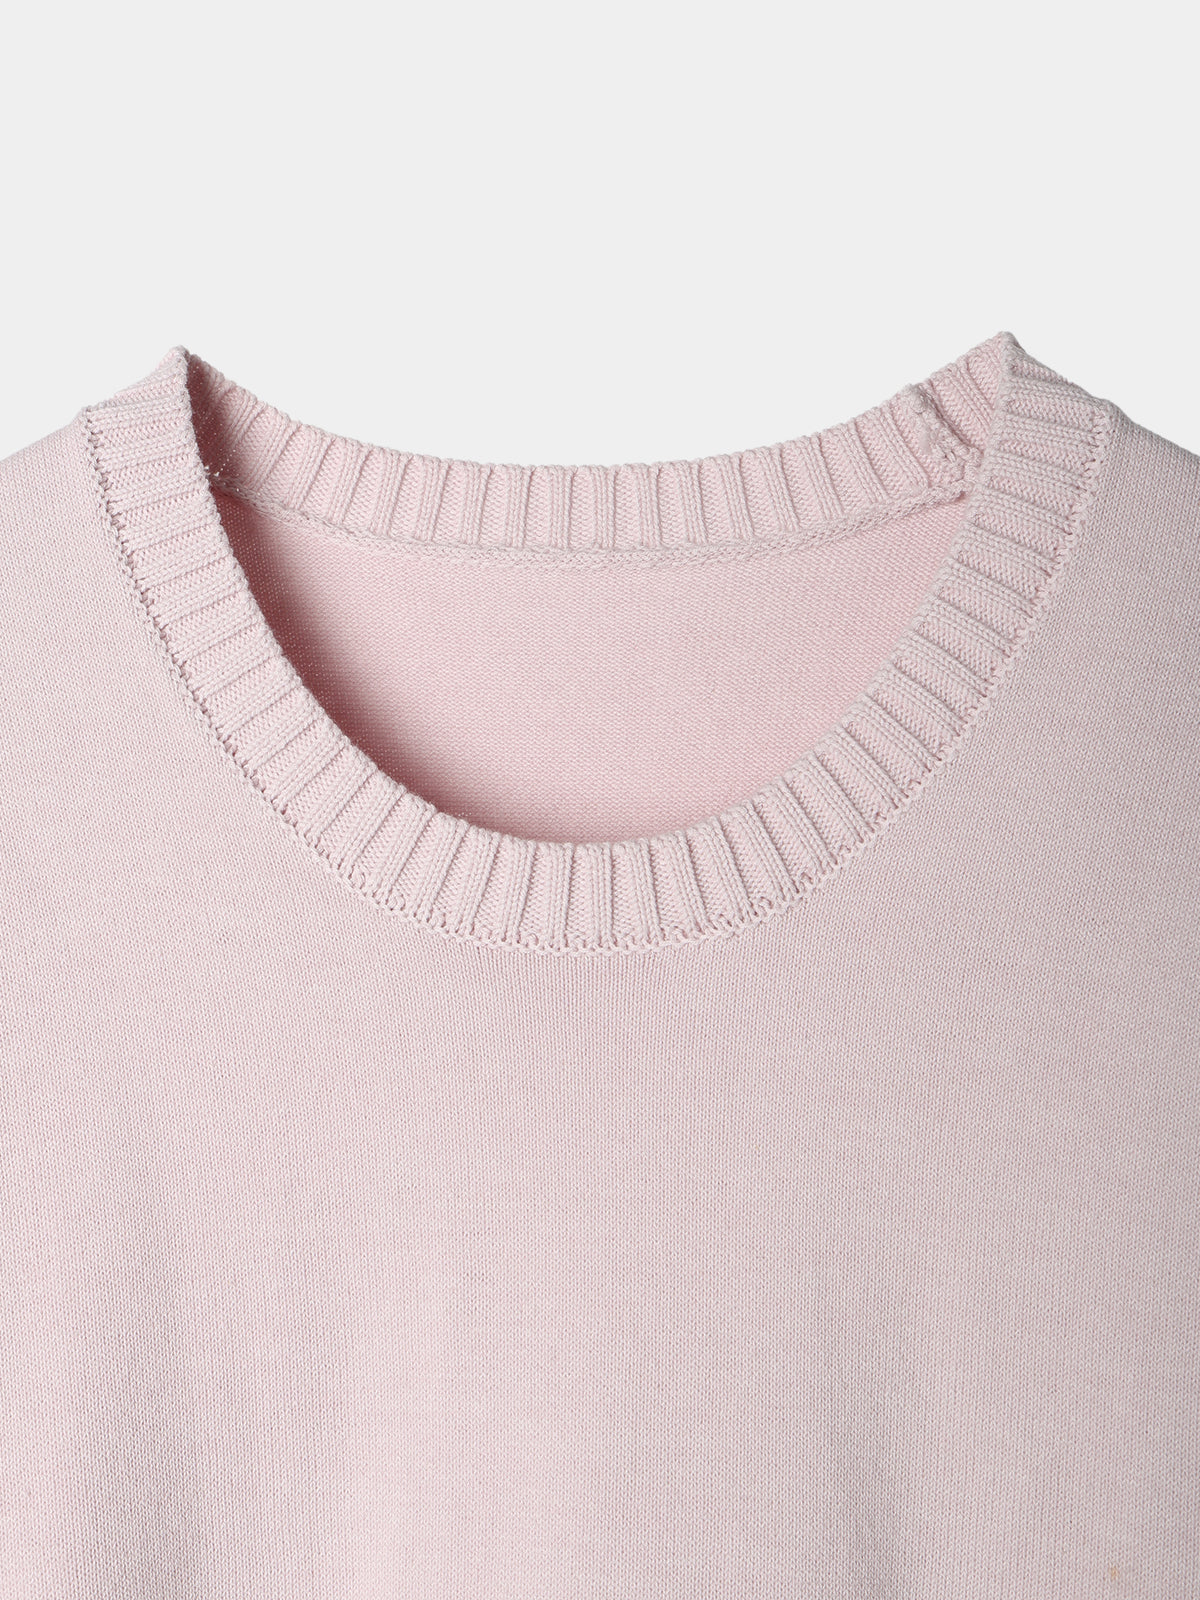 Crew neck Knit pullover